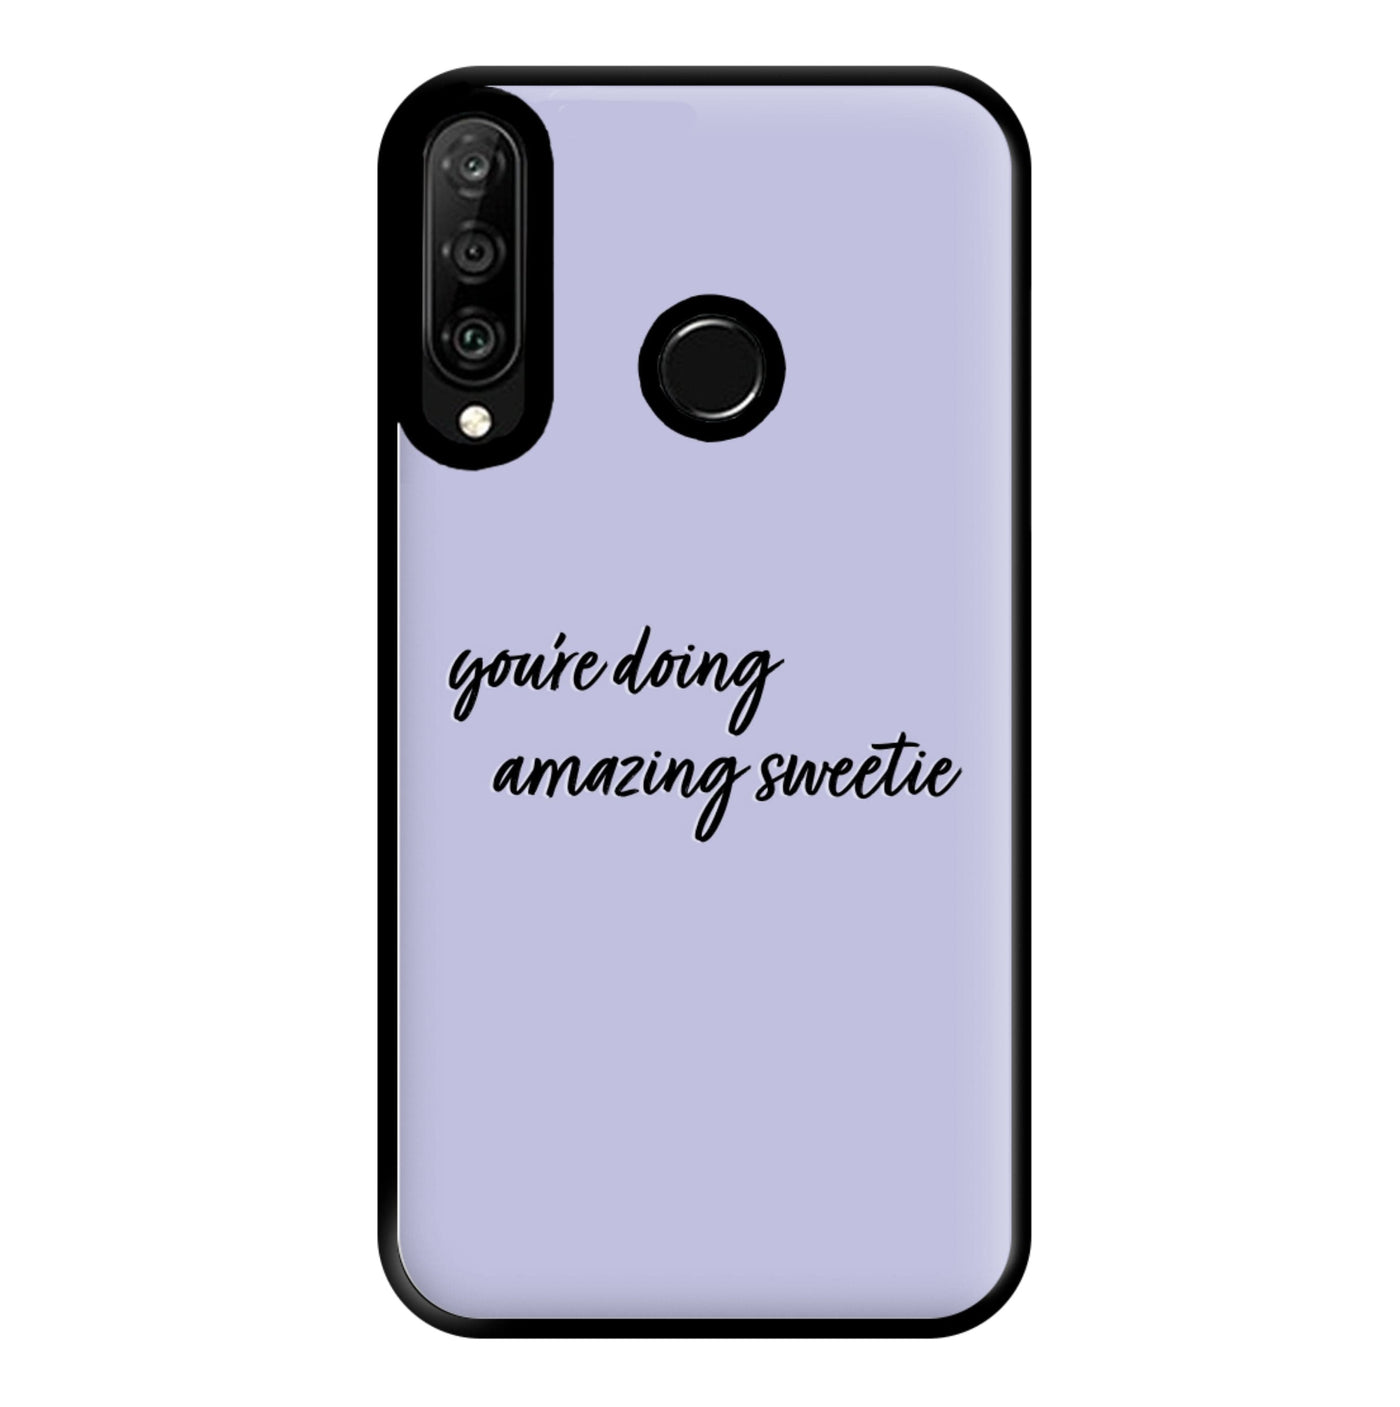 You're Doing Amazing Sweetie - Kris Jenner Phone Case